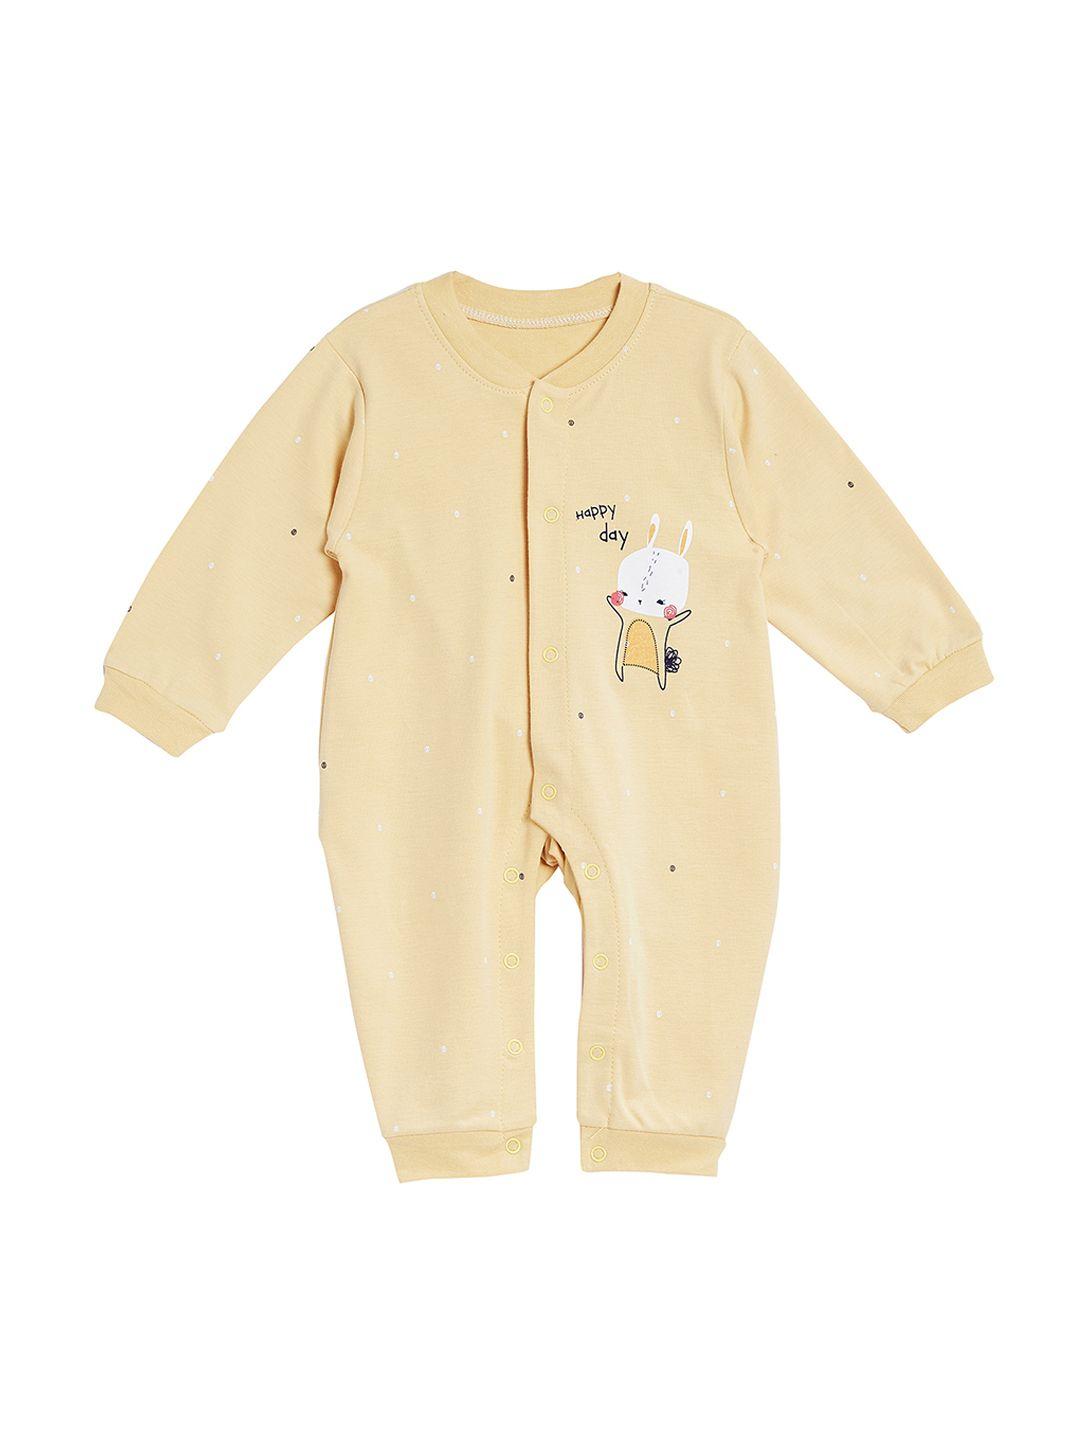 camey kids yellow printed romper